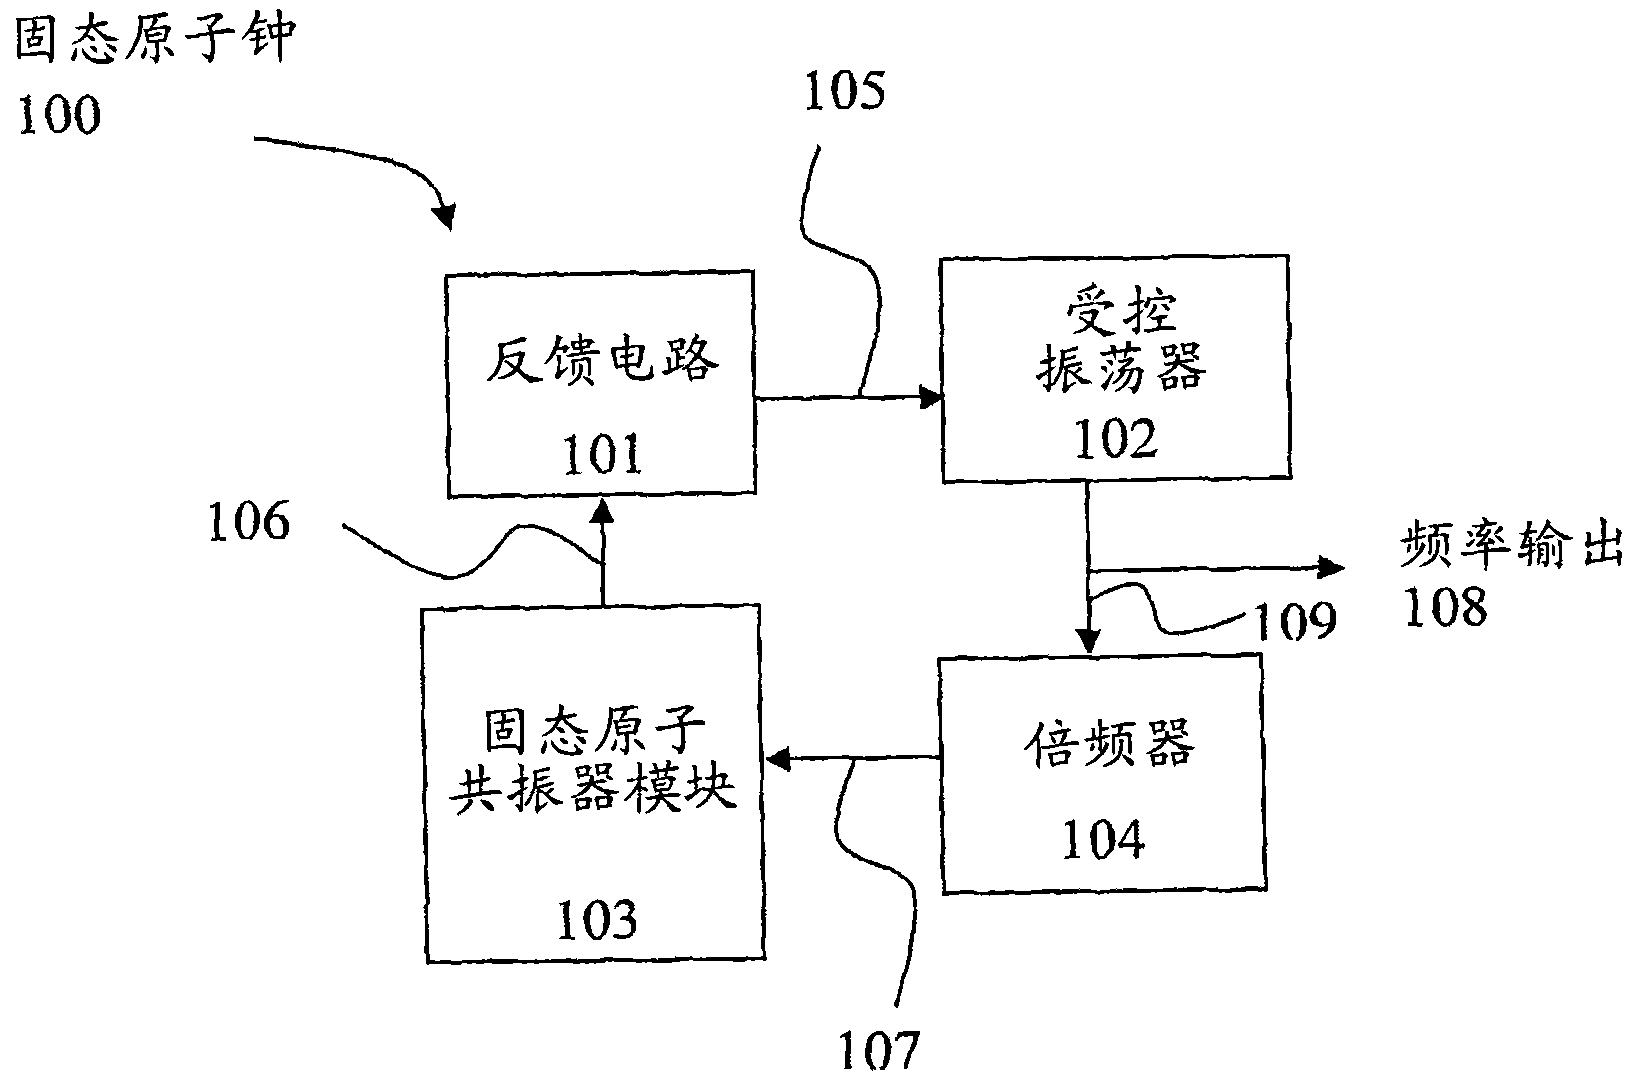 Device, system, and method of frequency generation using an atomic resonator